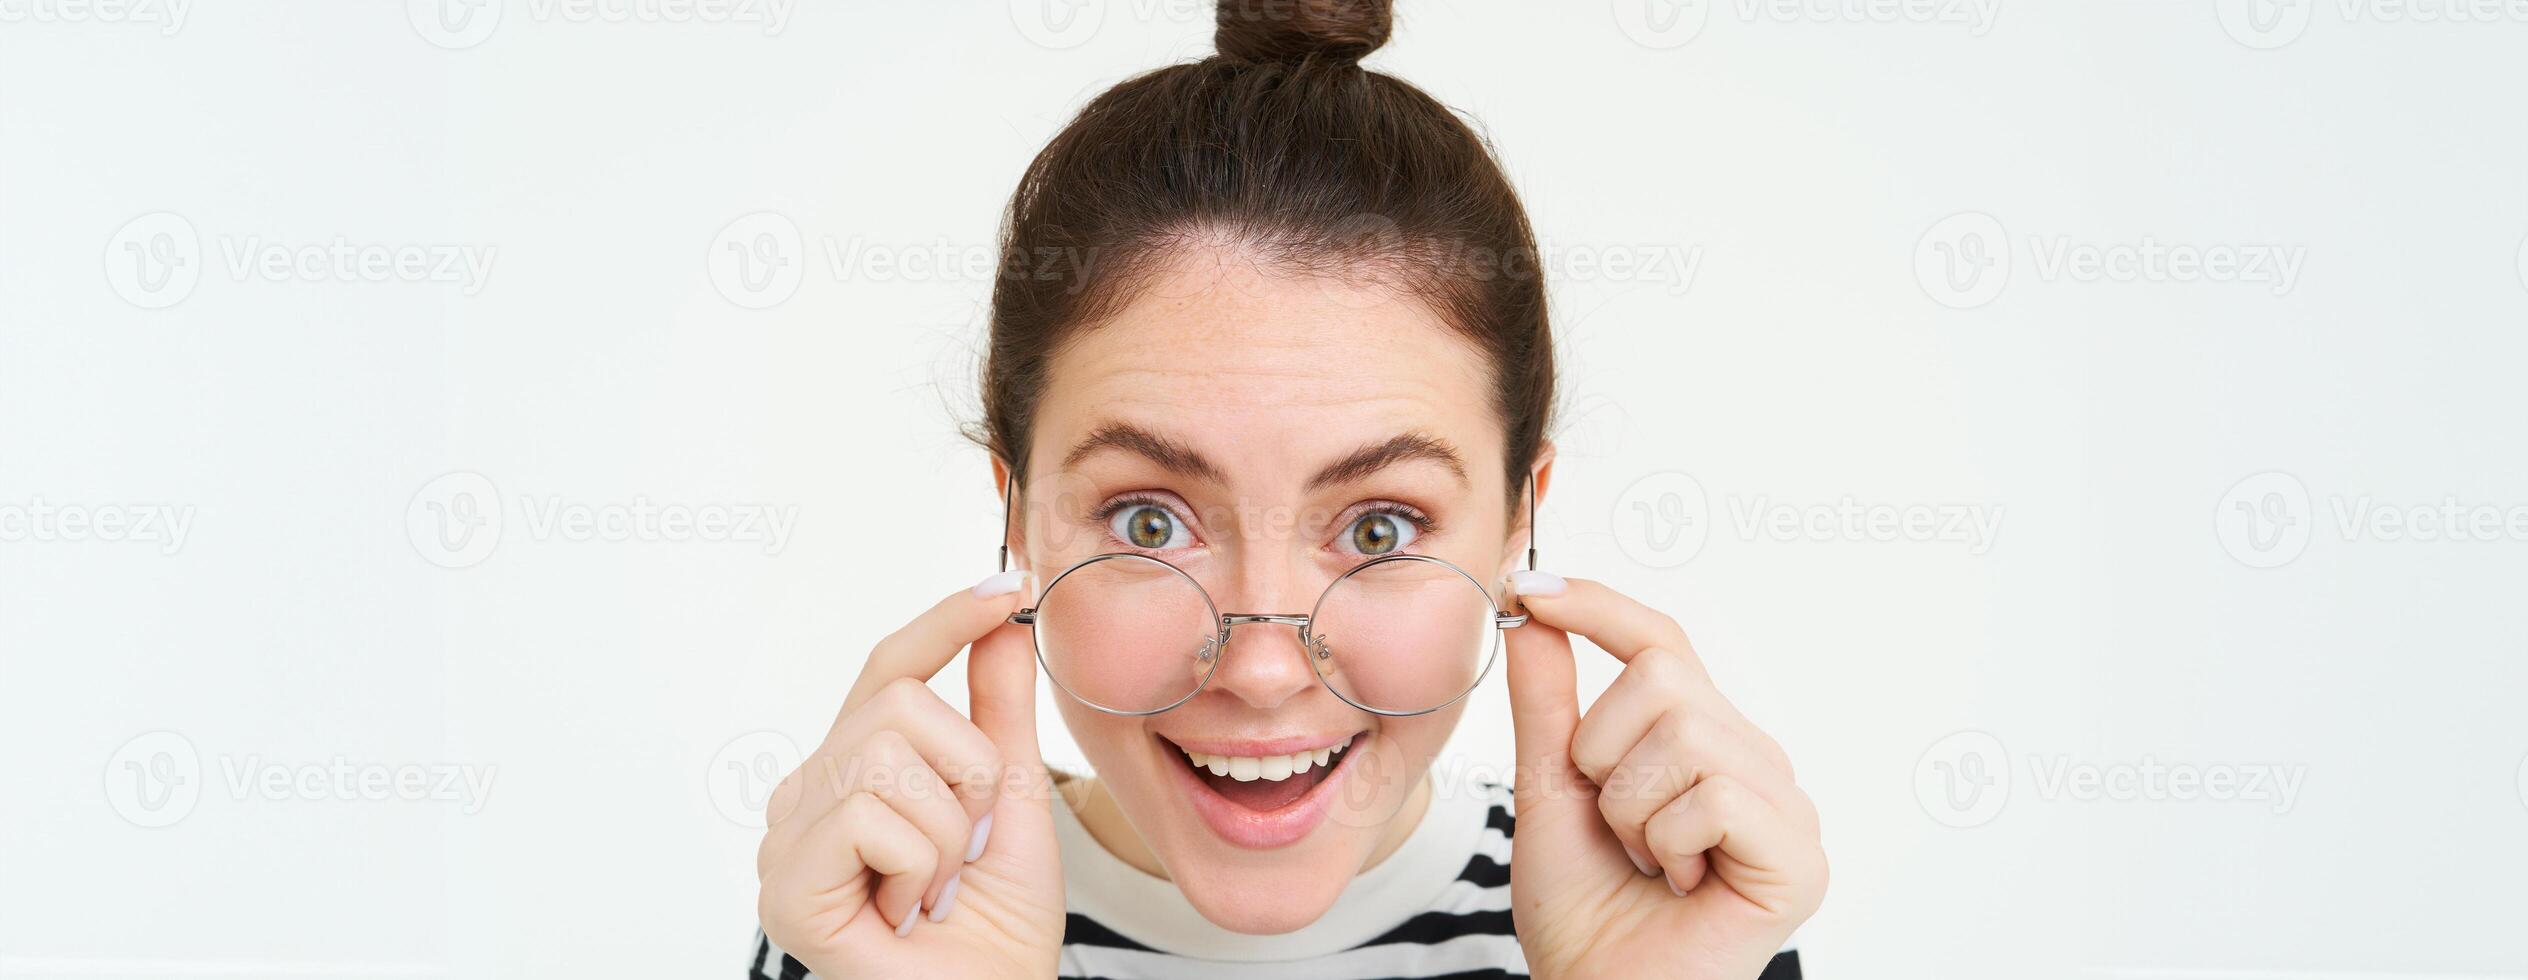 Close up portrait of woman with happy face, leaning towards camera as if reading amazing text, great news, wearing glasses, isolated over white background photo